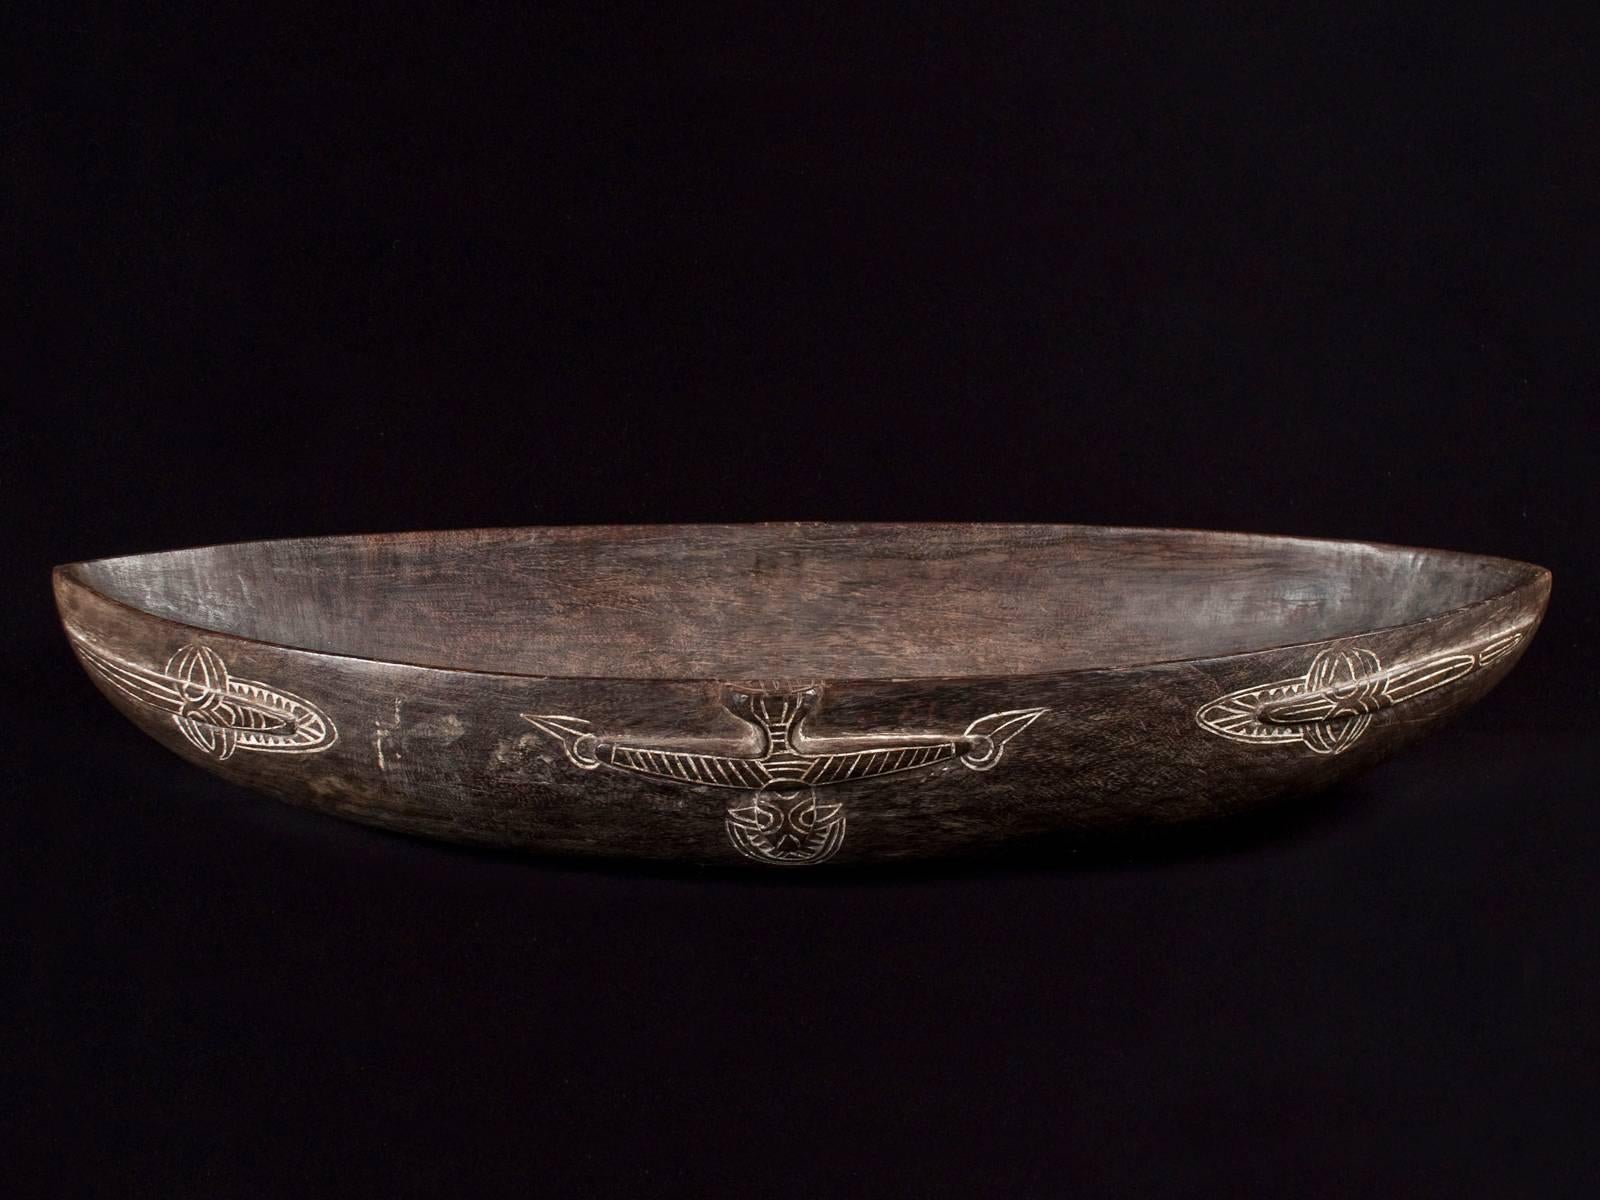 Mid-20th century large tribal wood food bowl, Tami Island, Huon Gulf, Papua New Guinea.

Tami Islanders created intricately carved hardwood bowls, which formed an essential component of the bride-wealth gifts exchanged at marriage ceremonies.